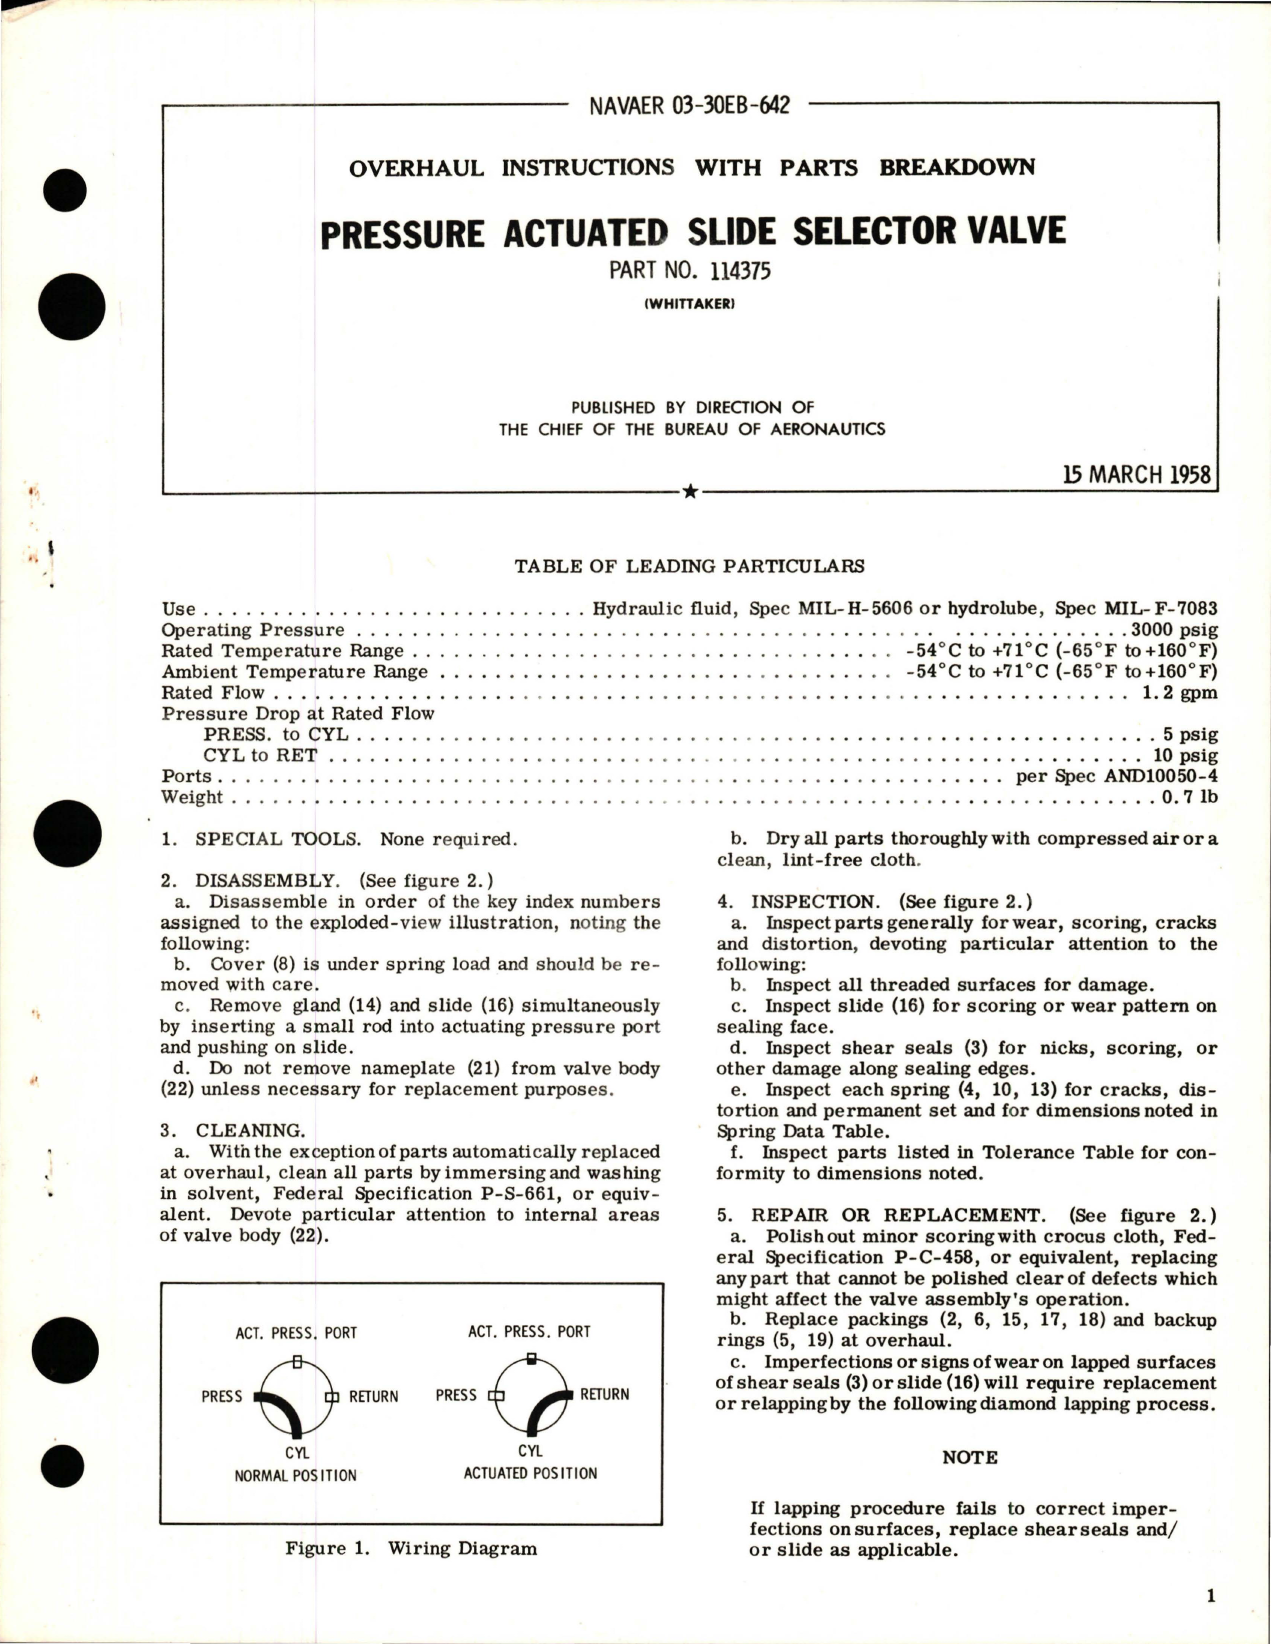 Sample page 1 from AirCorps Library document: Overhaul Instructions with Parts Breakdown for Pressure Actuated Slide Selector Valve - Part 114375 